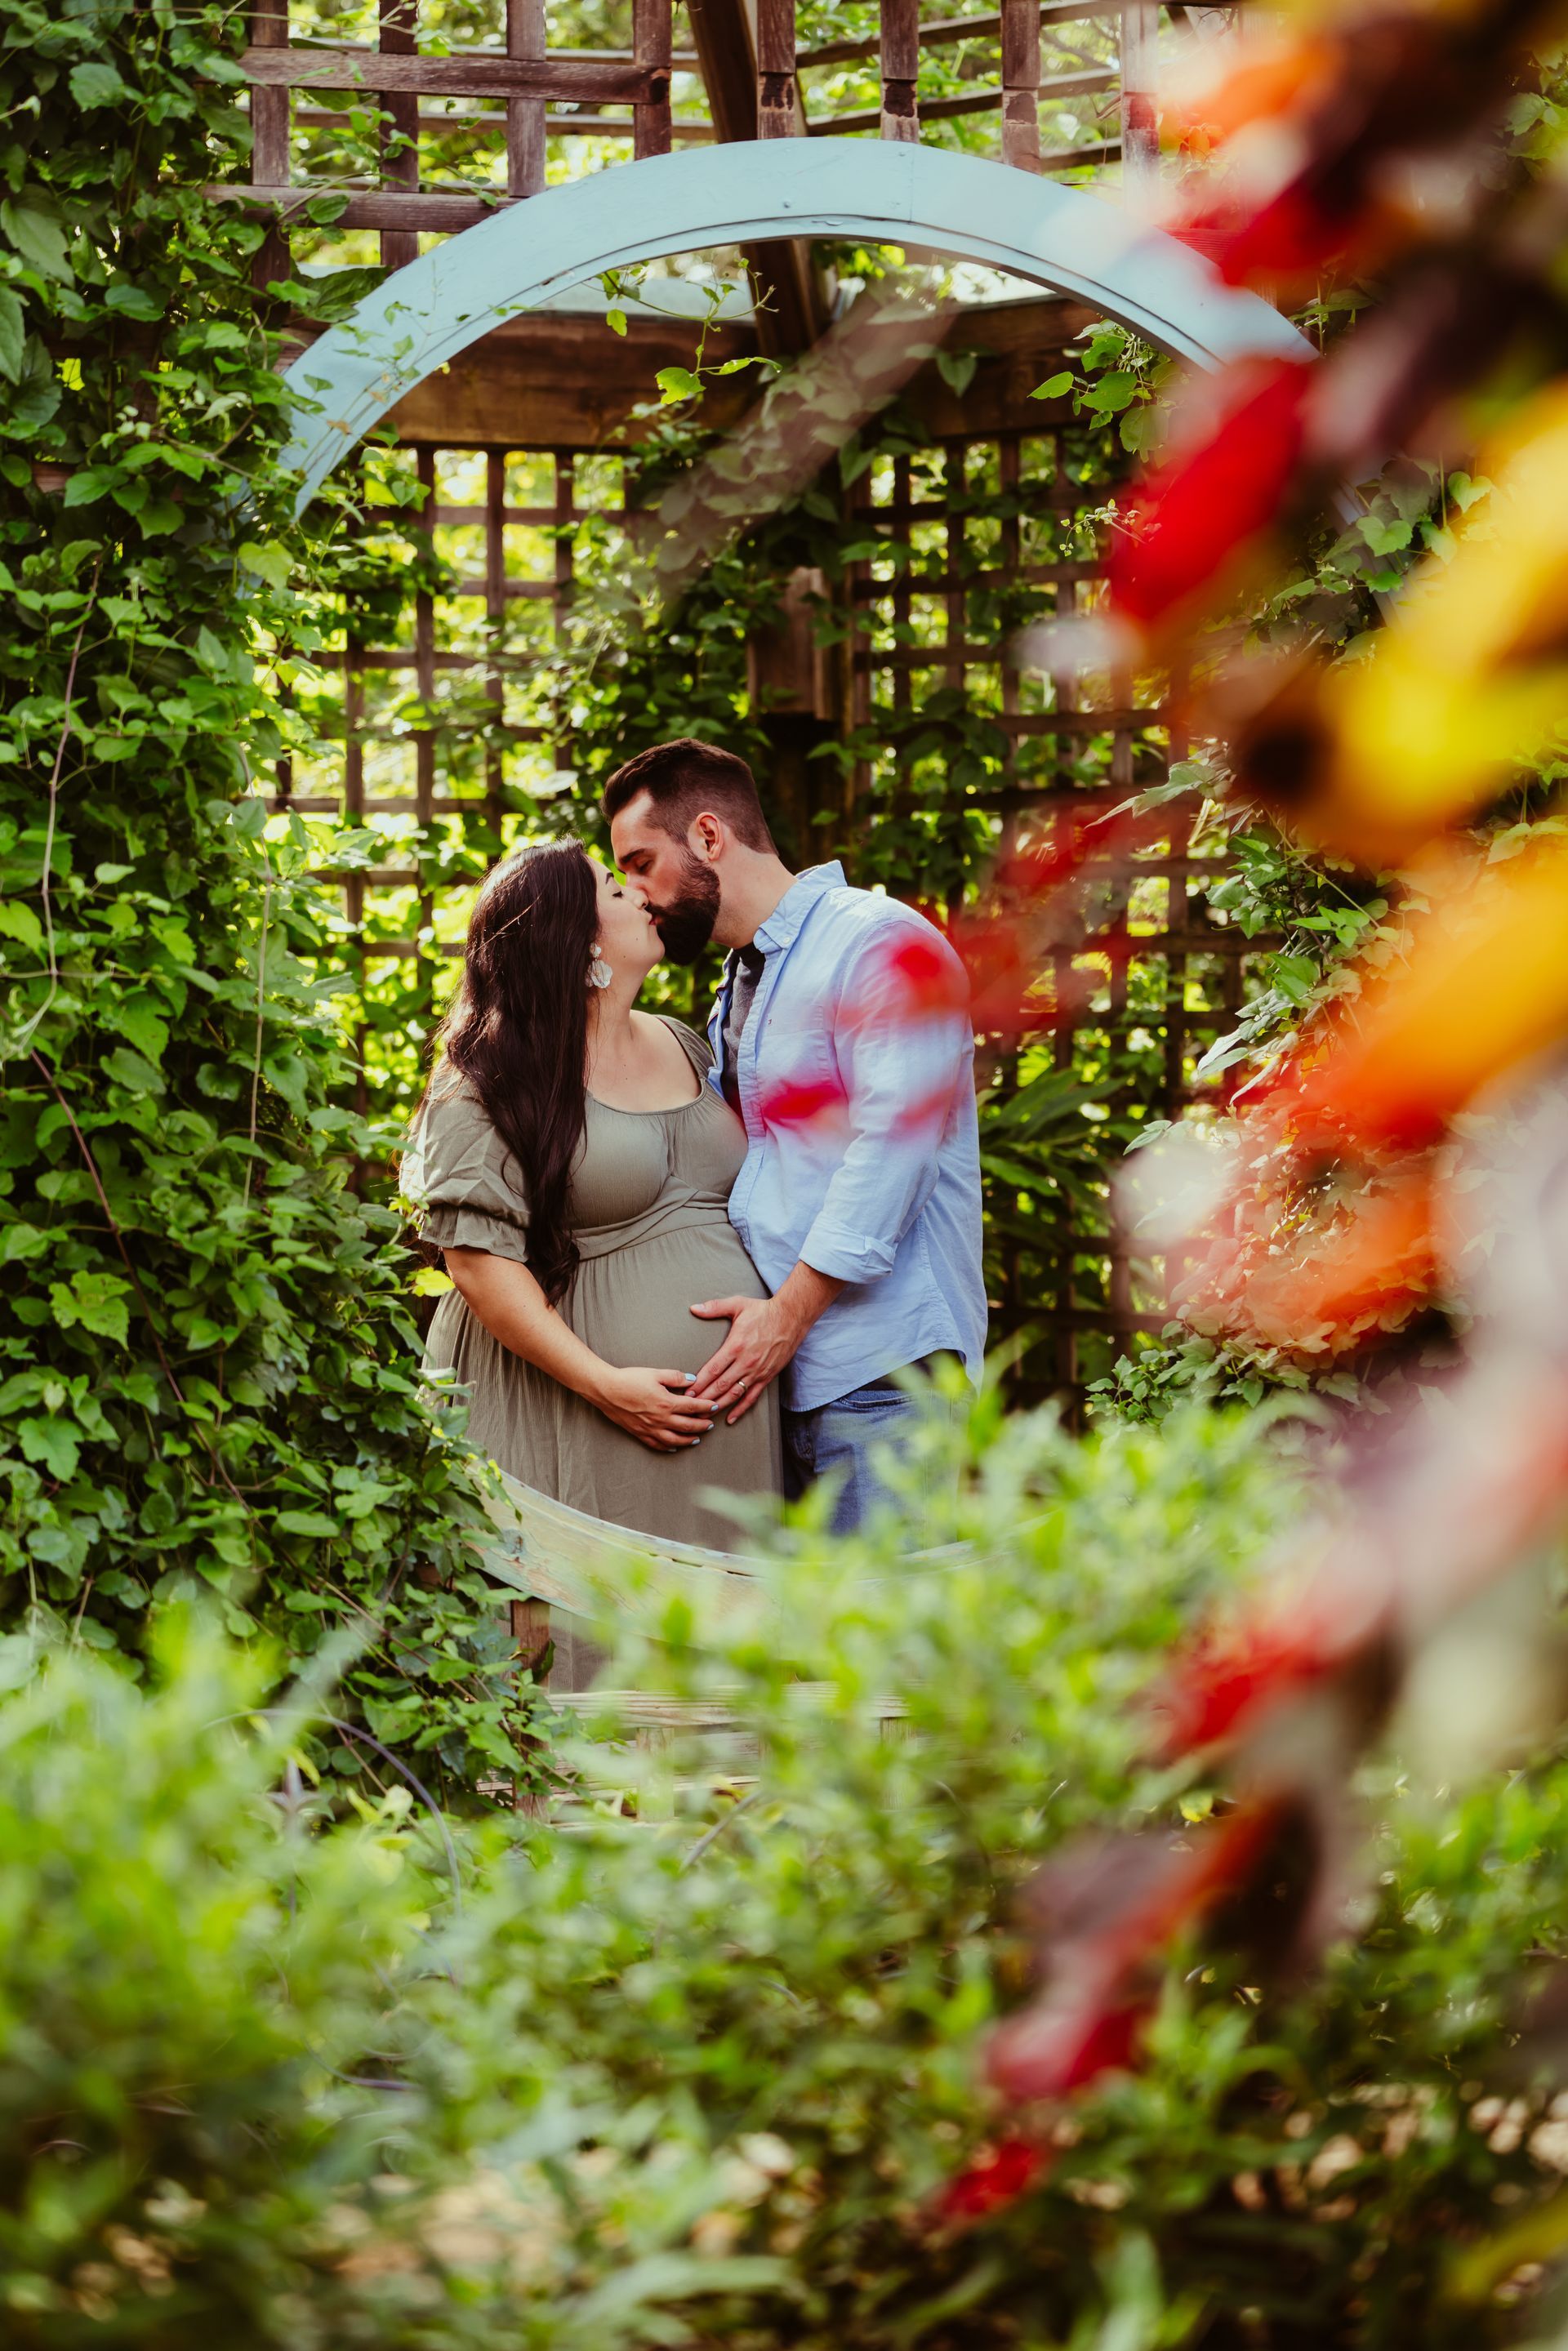 a pregnant woman and a man are kissing in a garden .